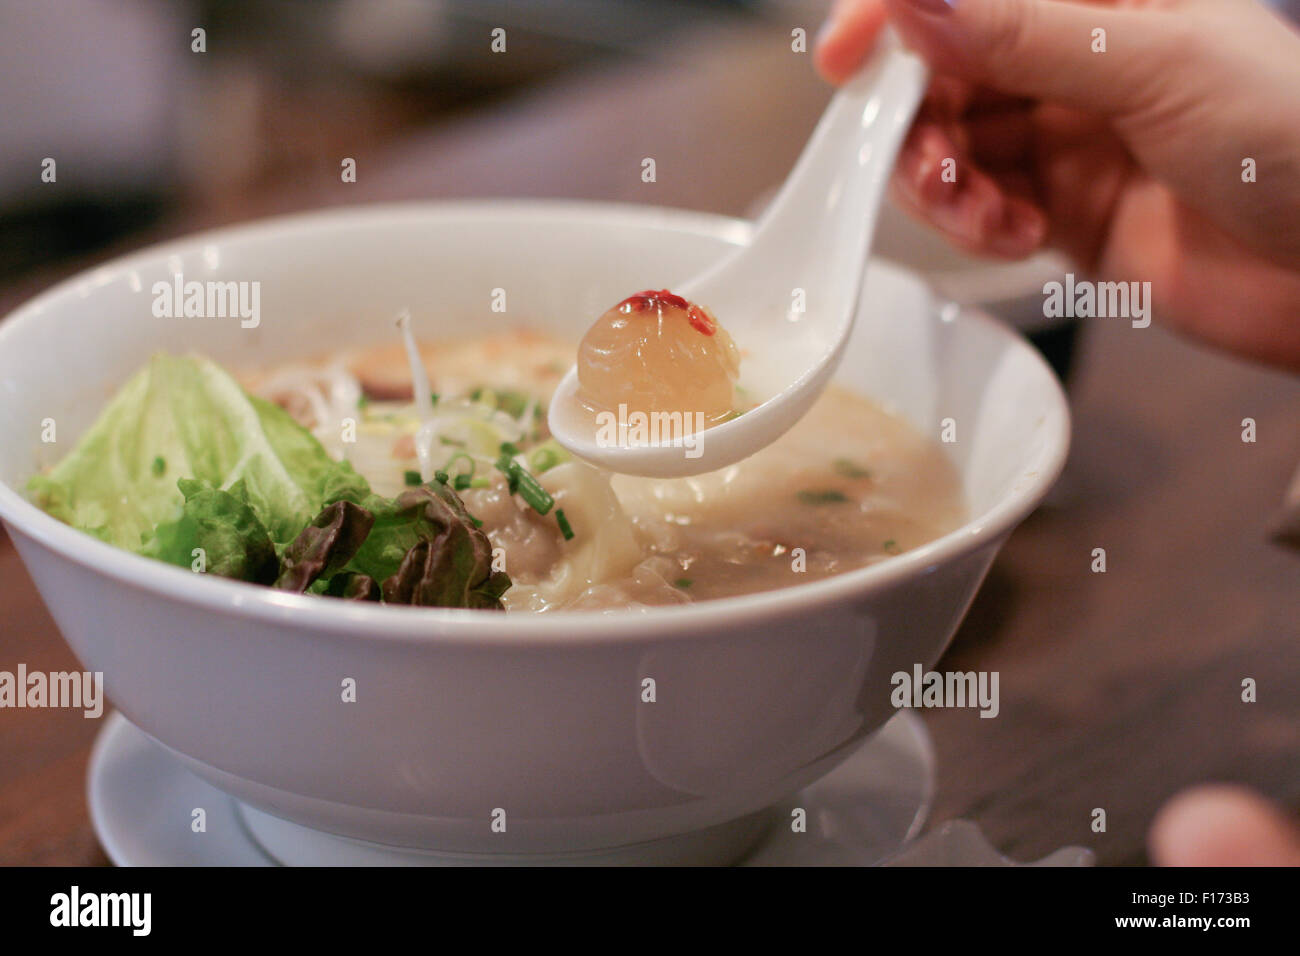 Collagen ball in spoon with Asian dumpling soup in bowl. Stock Photo